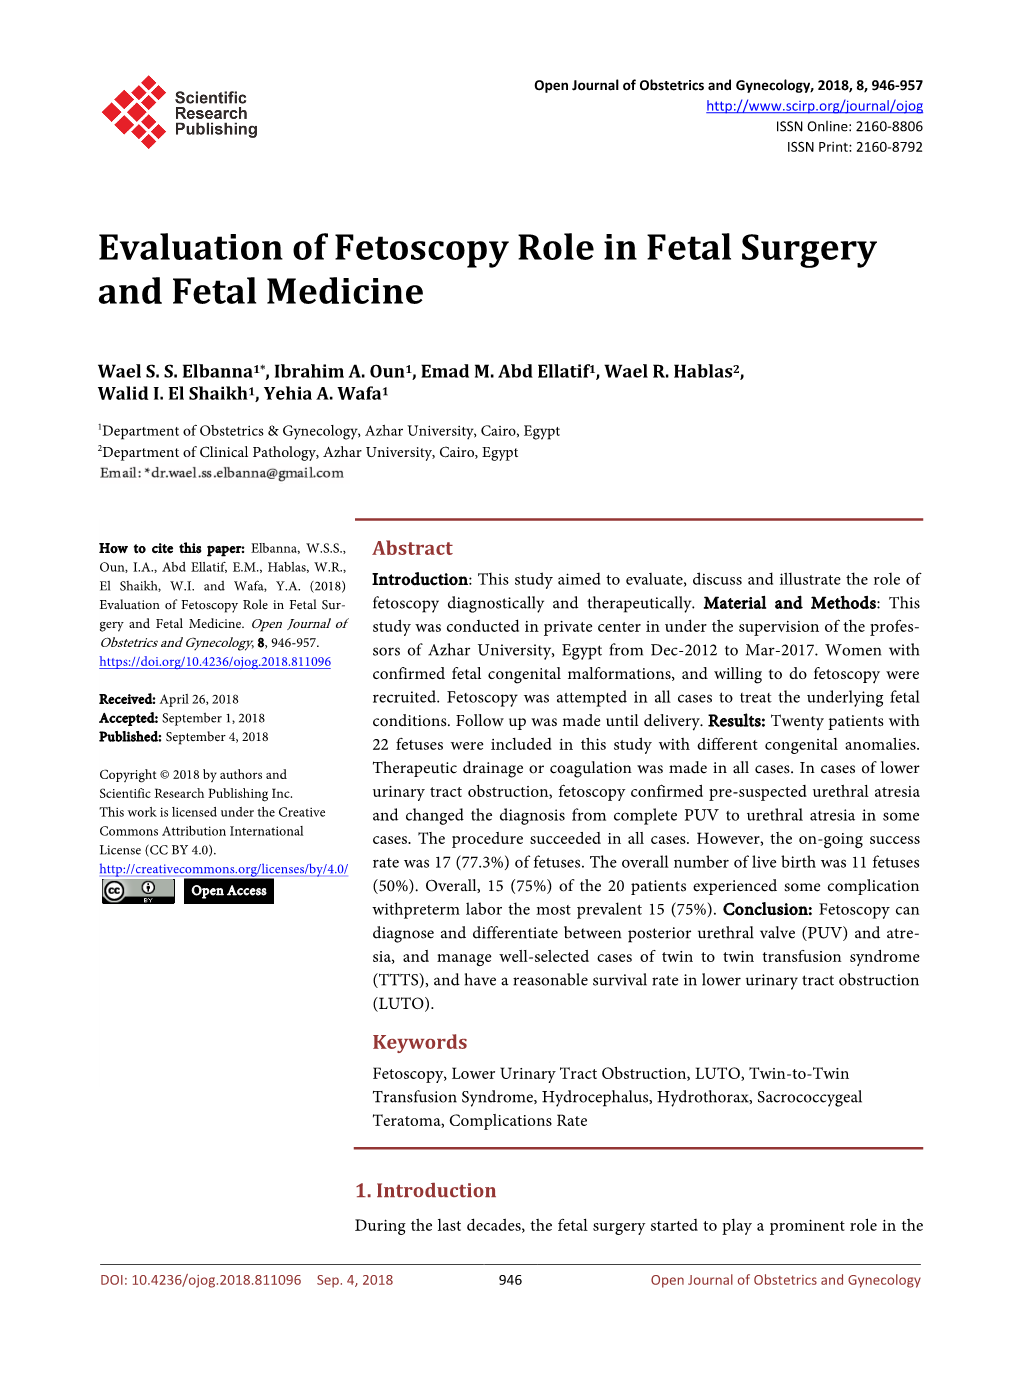 Evaluation of Fetoscopy Role in Fetal Surgery and Fetal Medicine